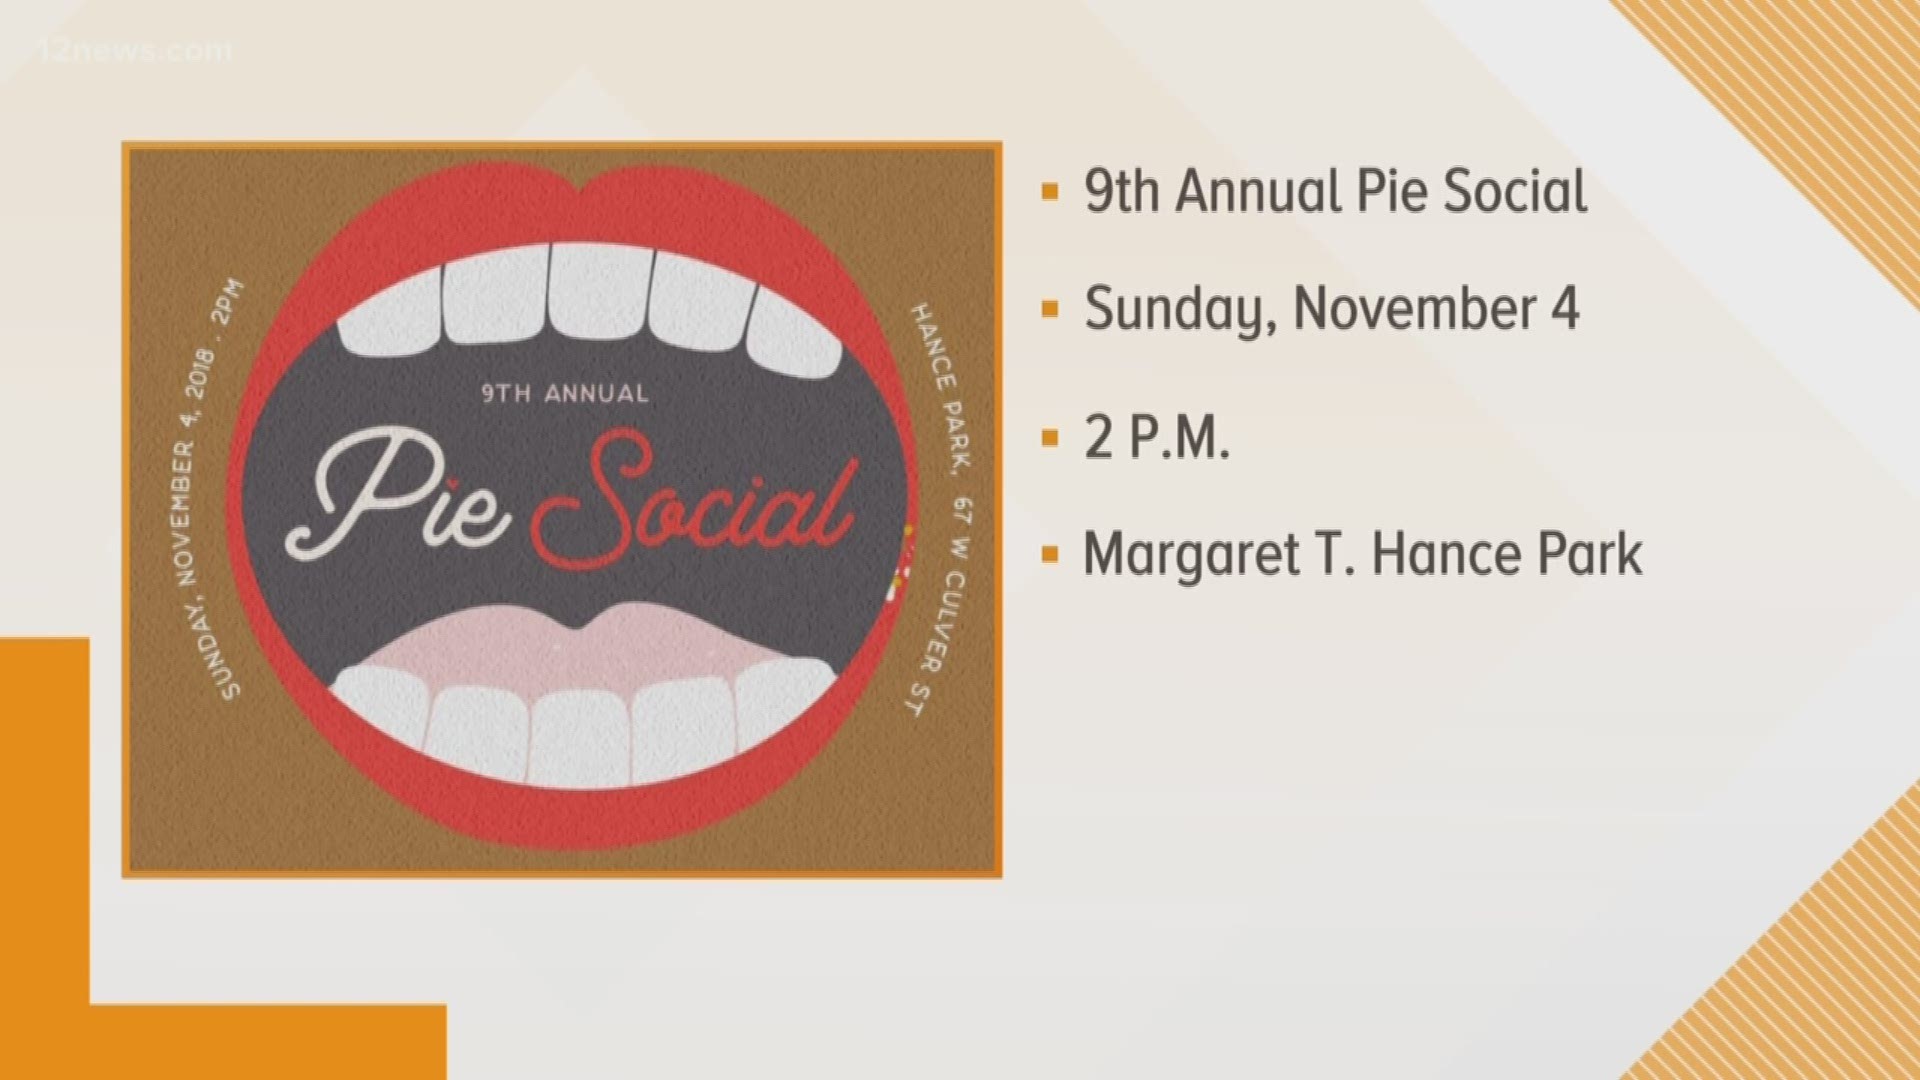 Check out the 9th annual Pie Social at Margaret T. Hance Park starting at 2p.m.